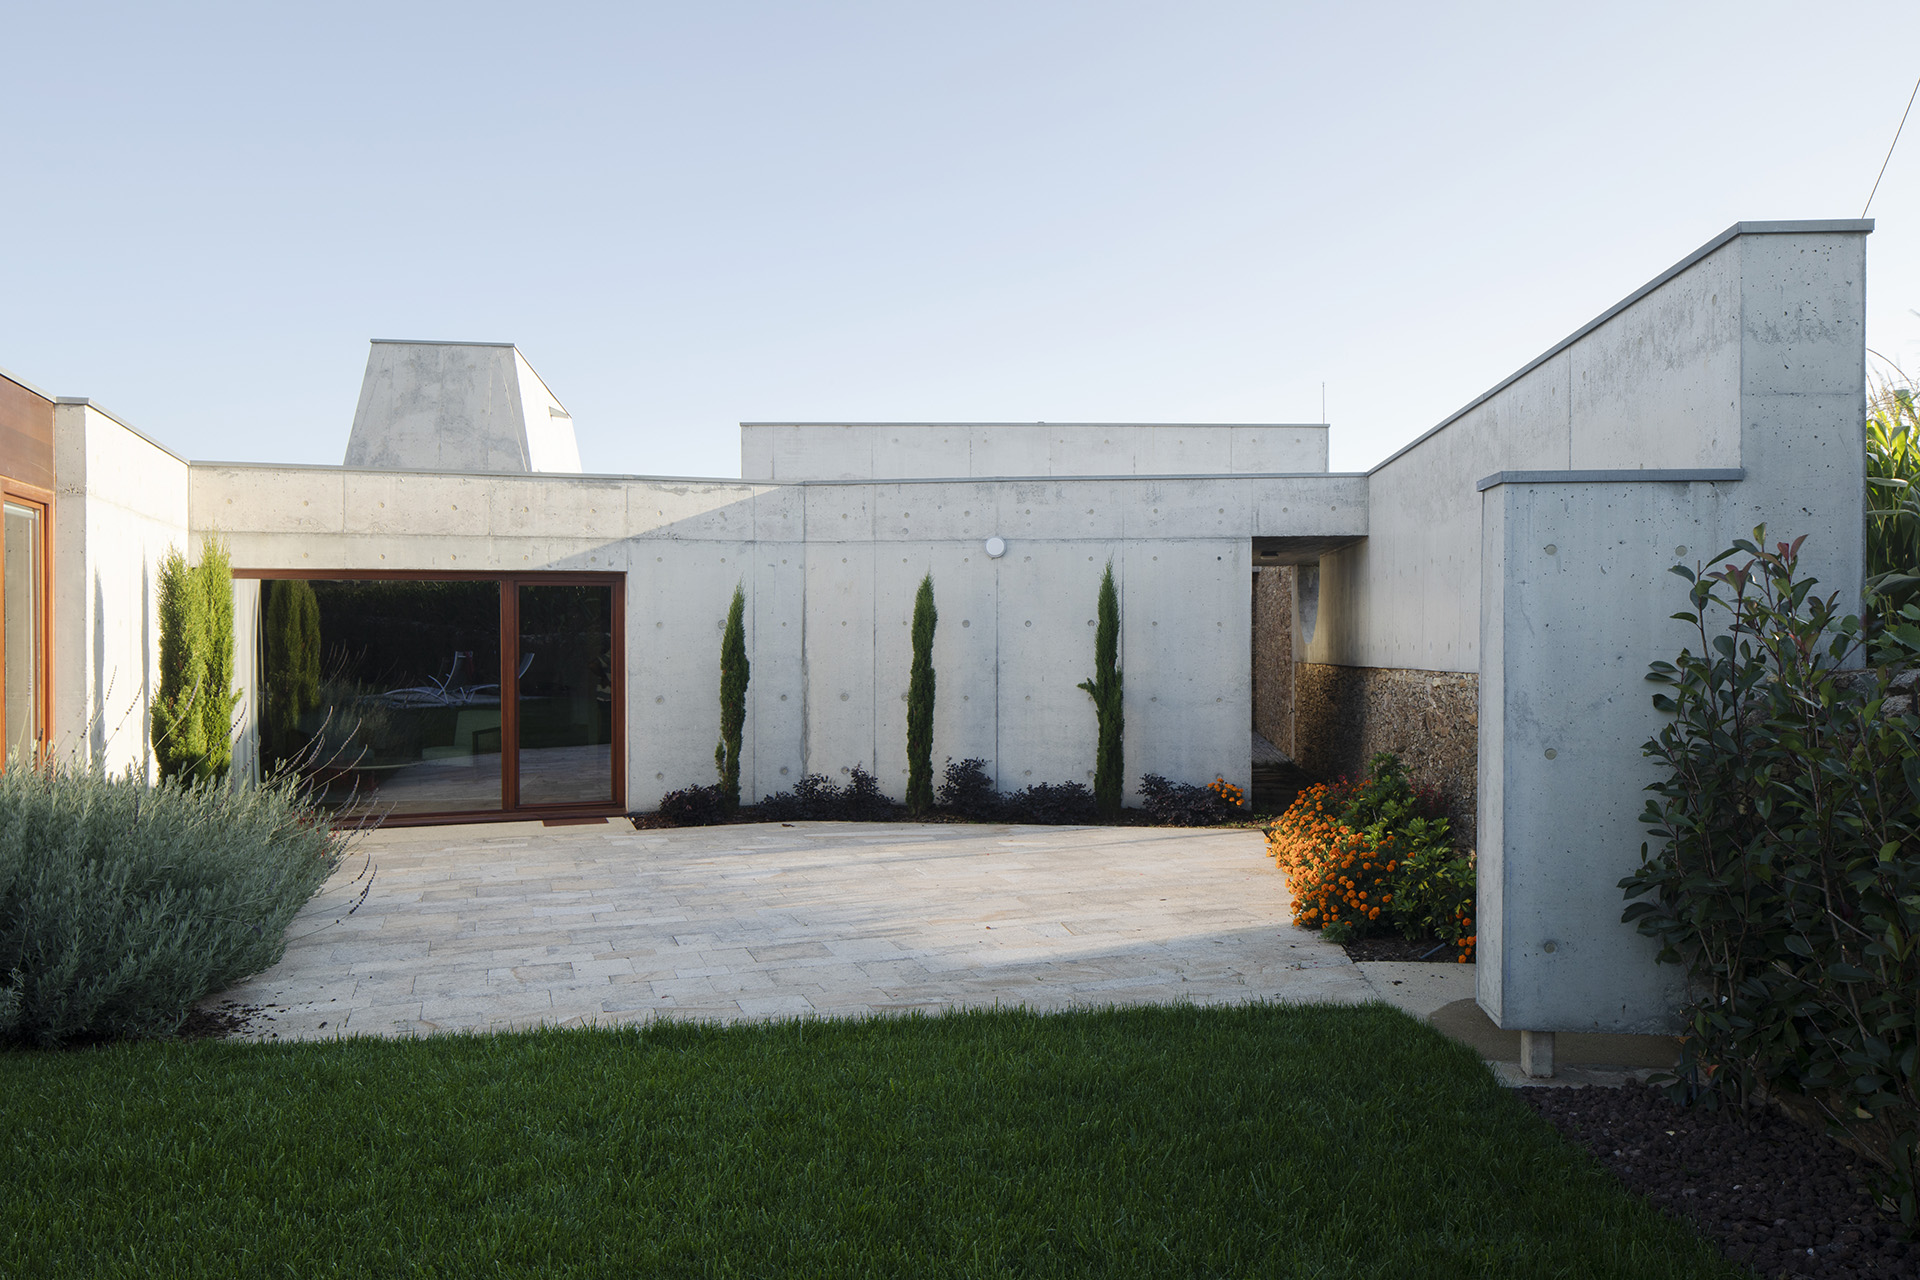 Four patios for the recovered and expanded Rates House: oases of intimacy which overlook the street and garden